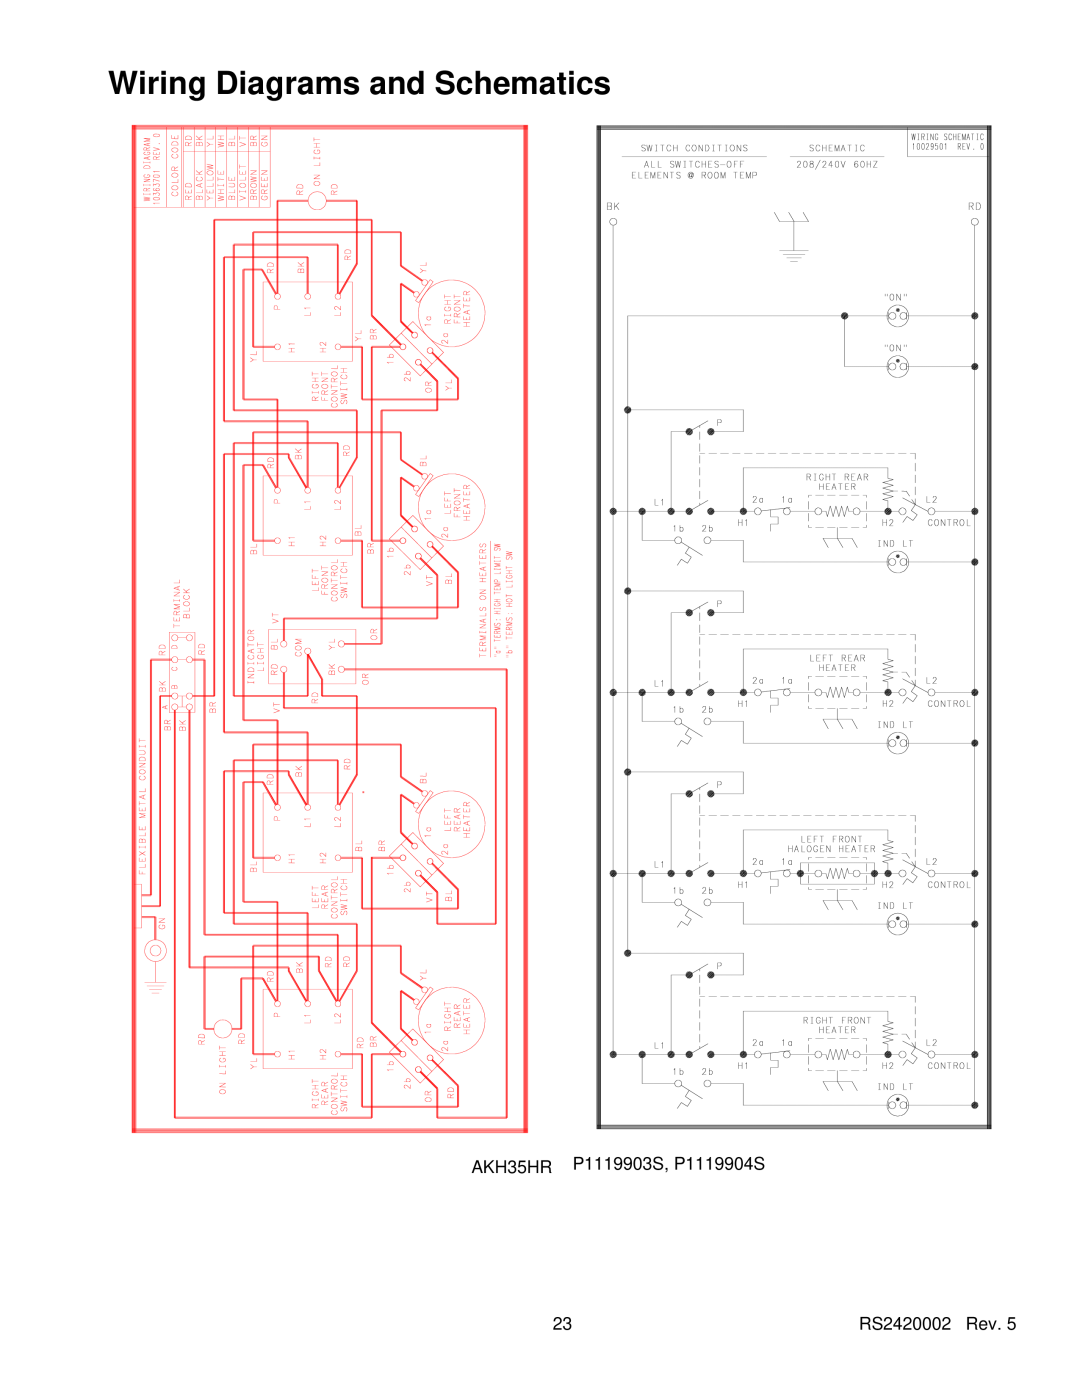 Amana AK2H30, AK2H36E2, AK2HW2, AK2T30/36E1/W1 Wiring Diagrams and Schematics, AKH35HR P1119903S, P1119904S, RS2420002 Rev 